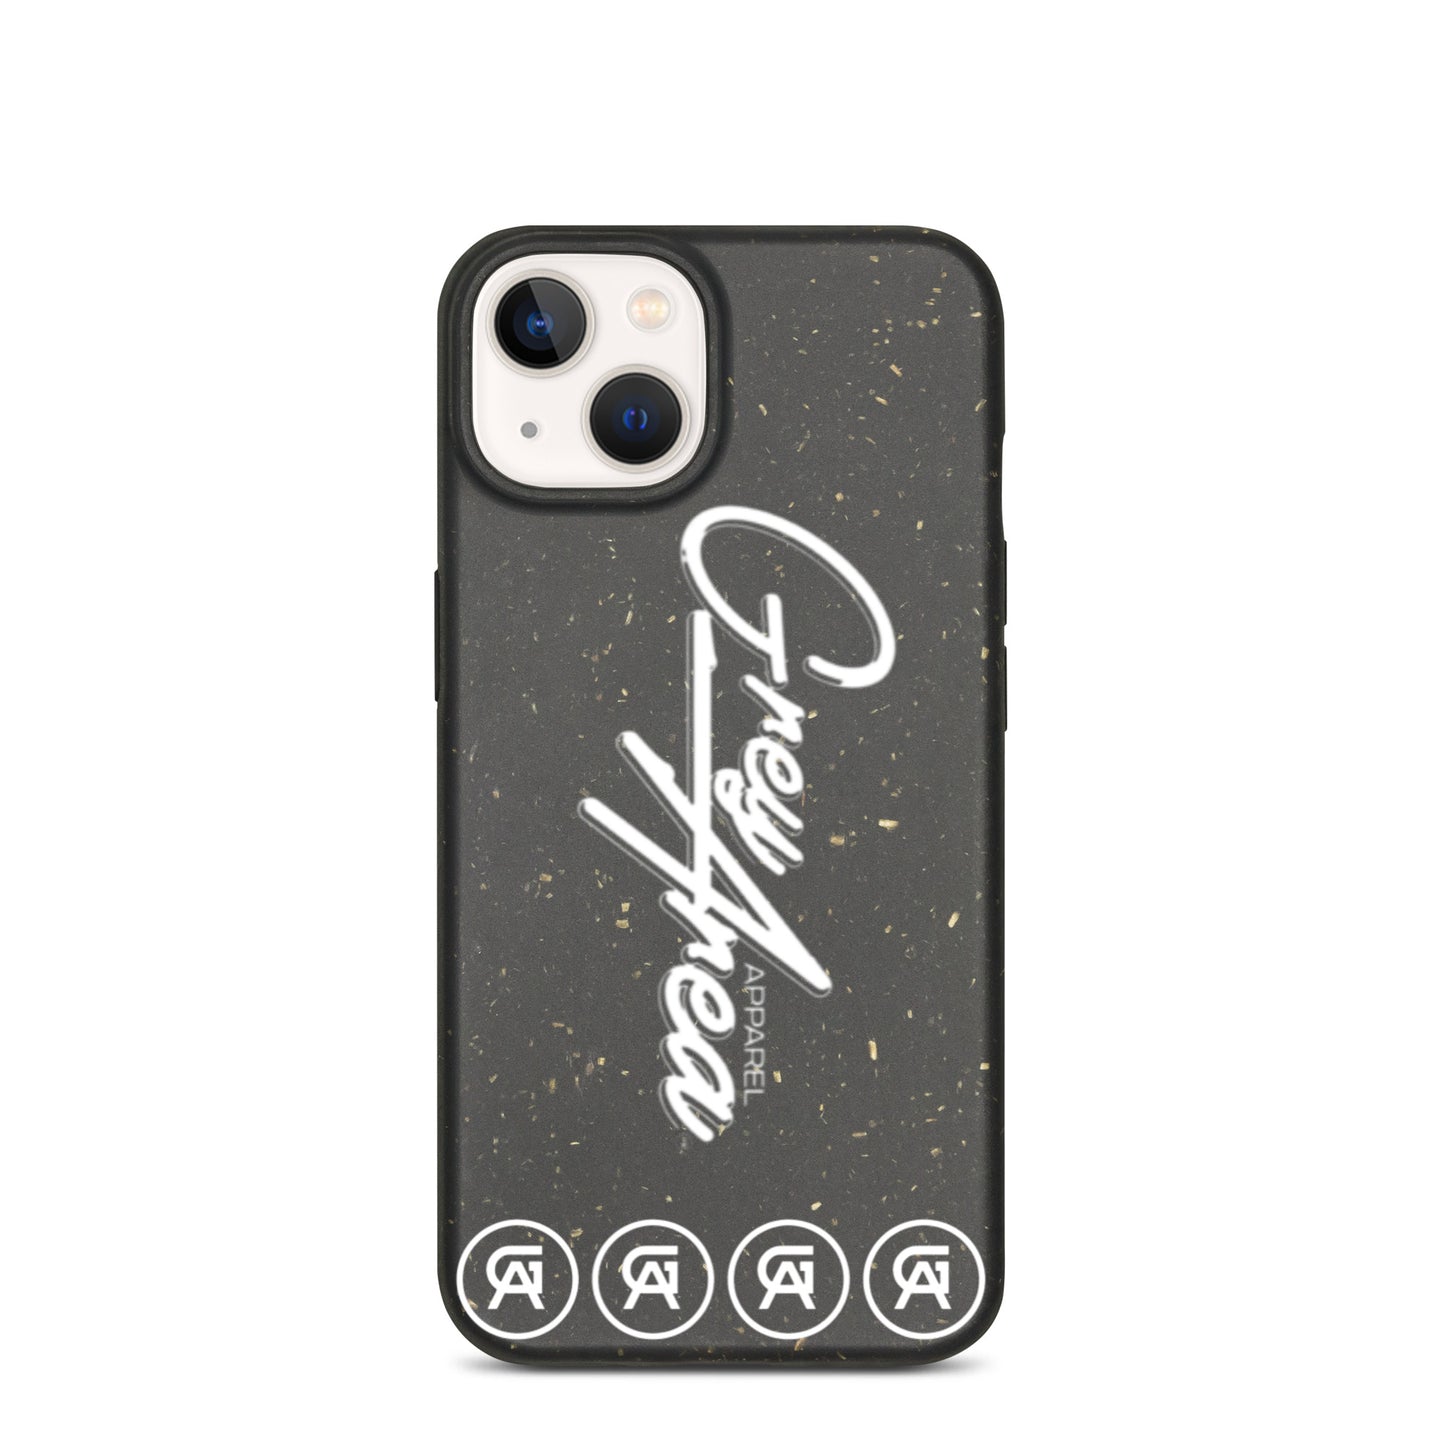 GA Speckled iPhone case